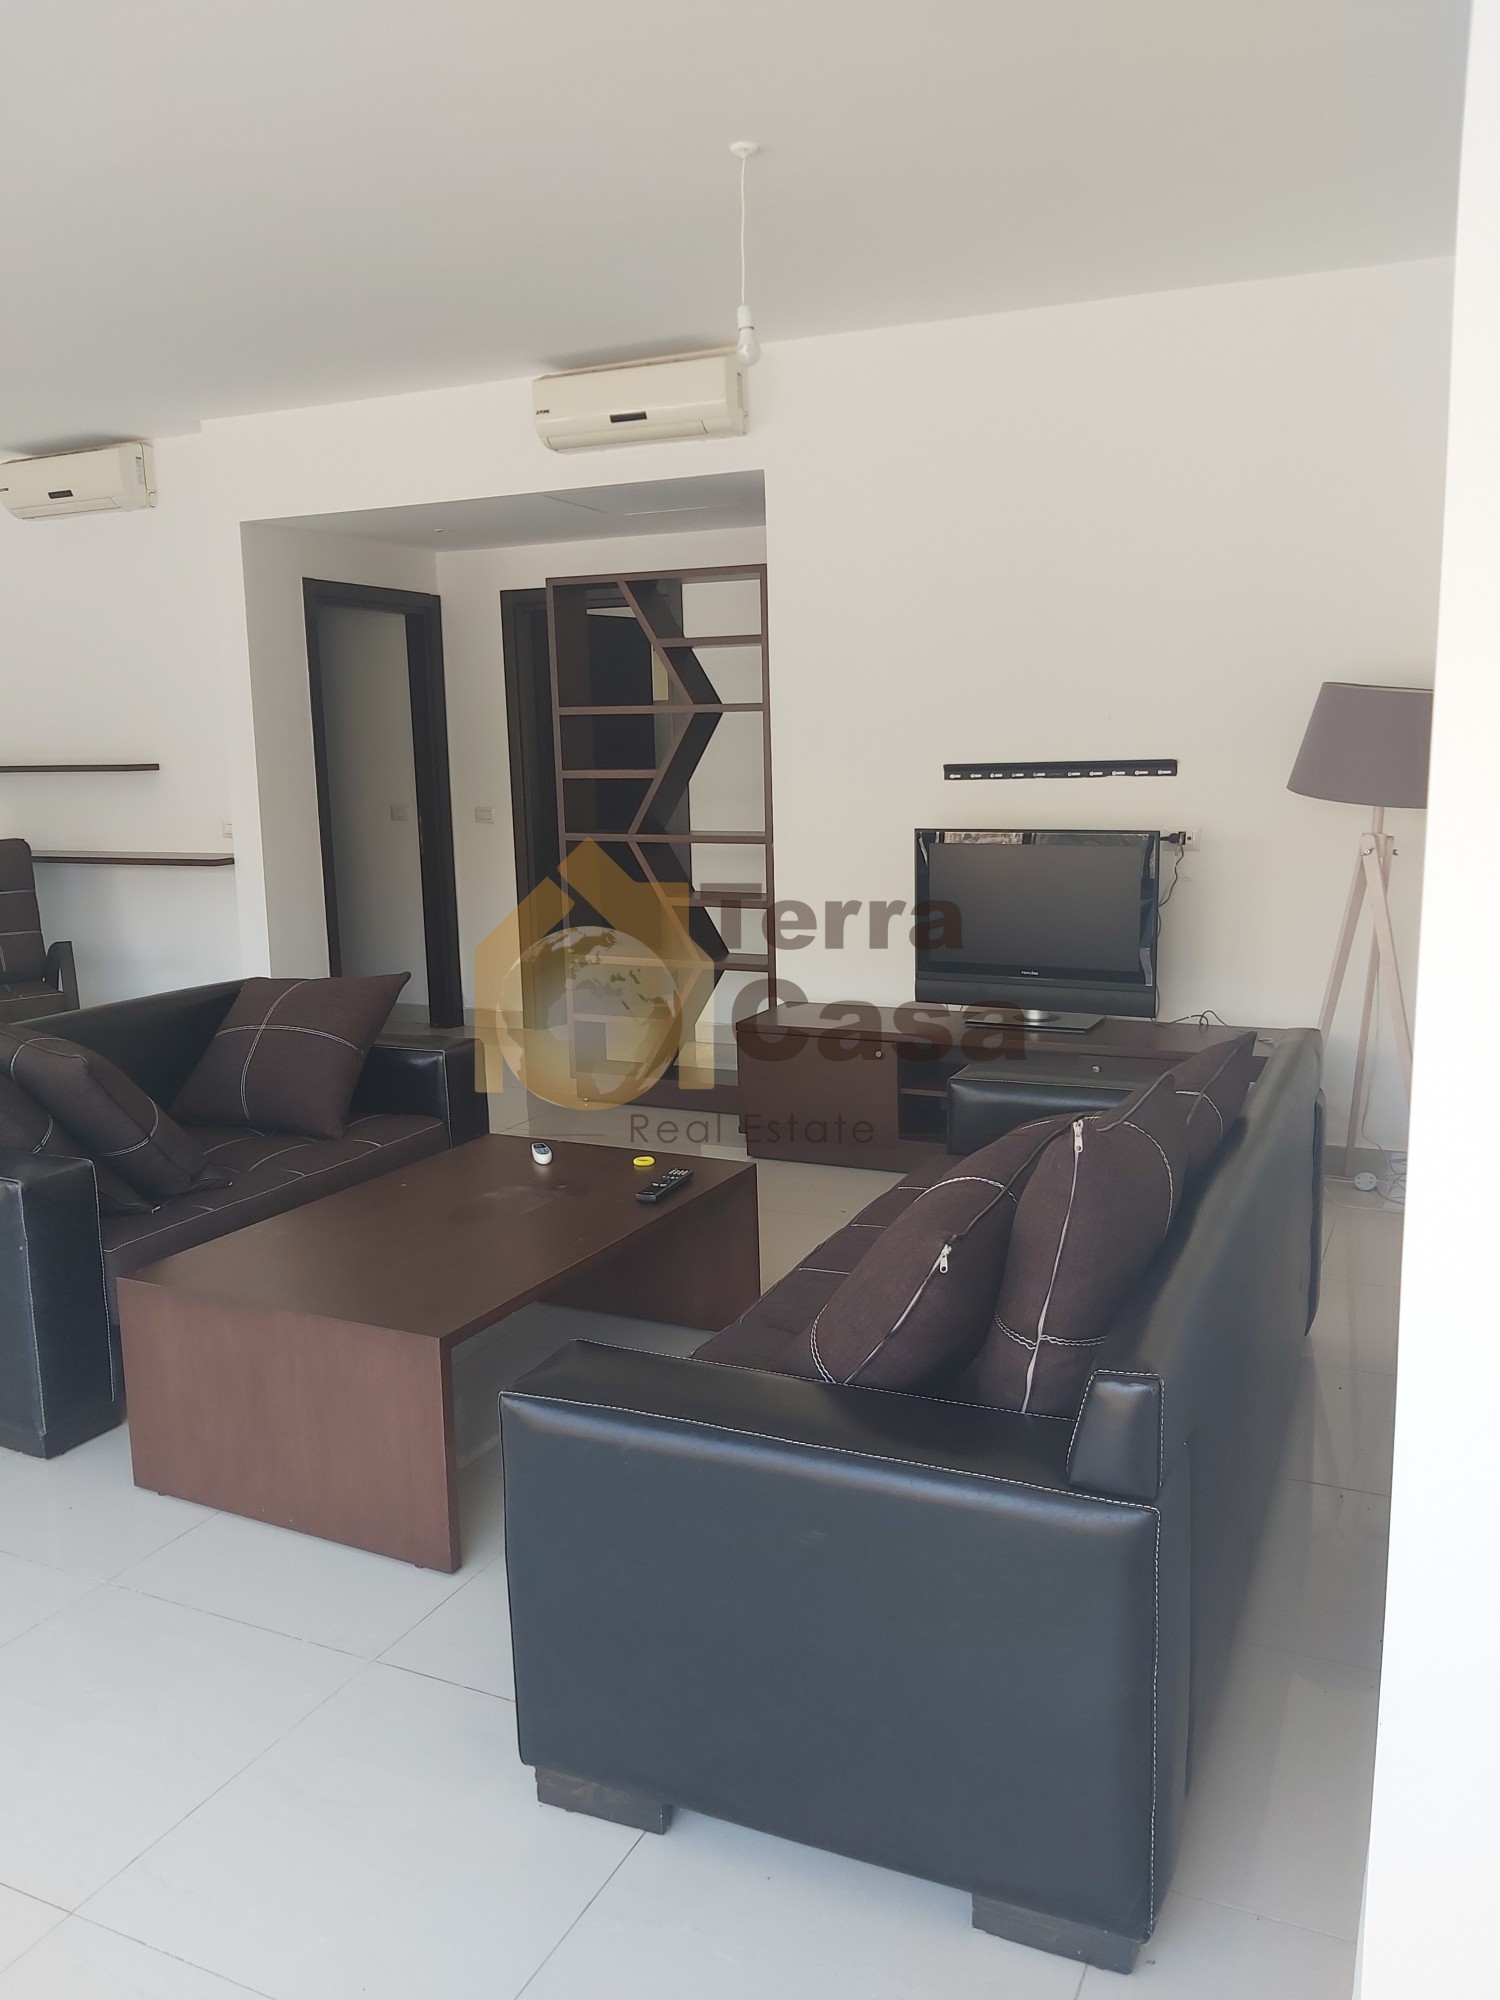 A fully furnished 145sqm apartment in Dbayeh for rent for 900$